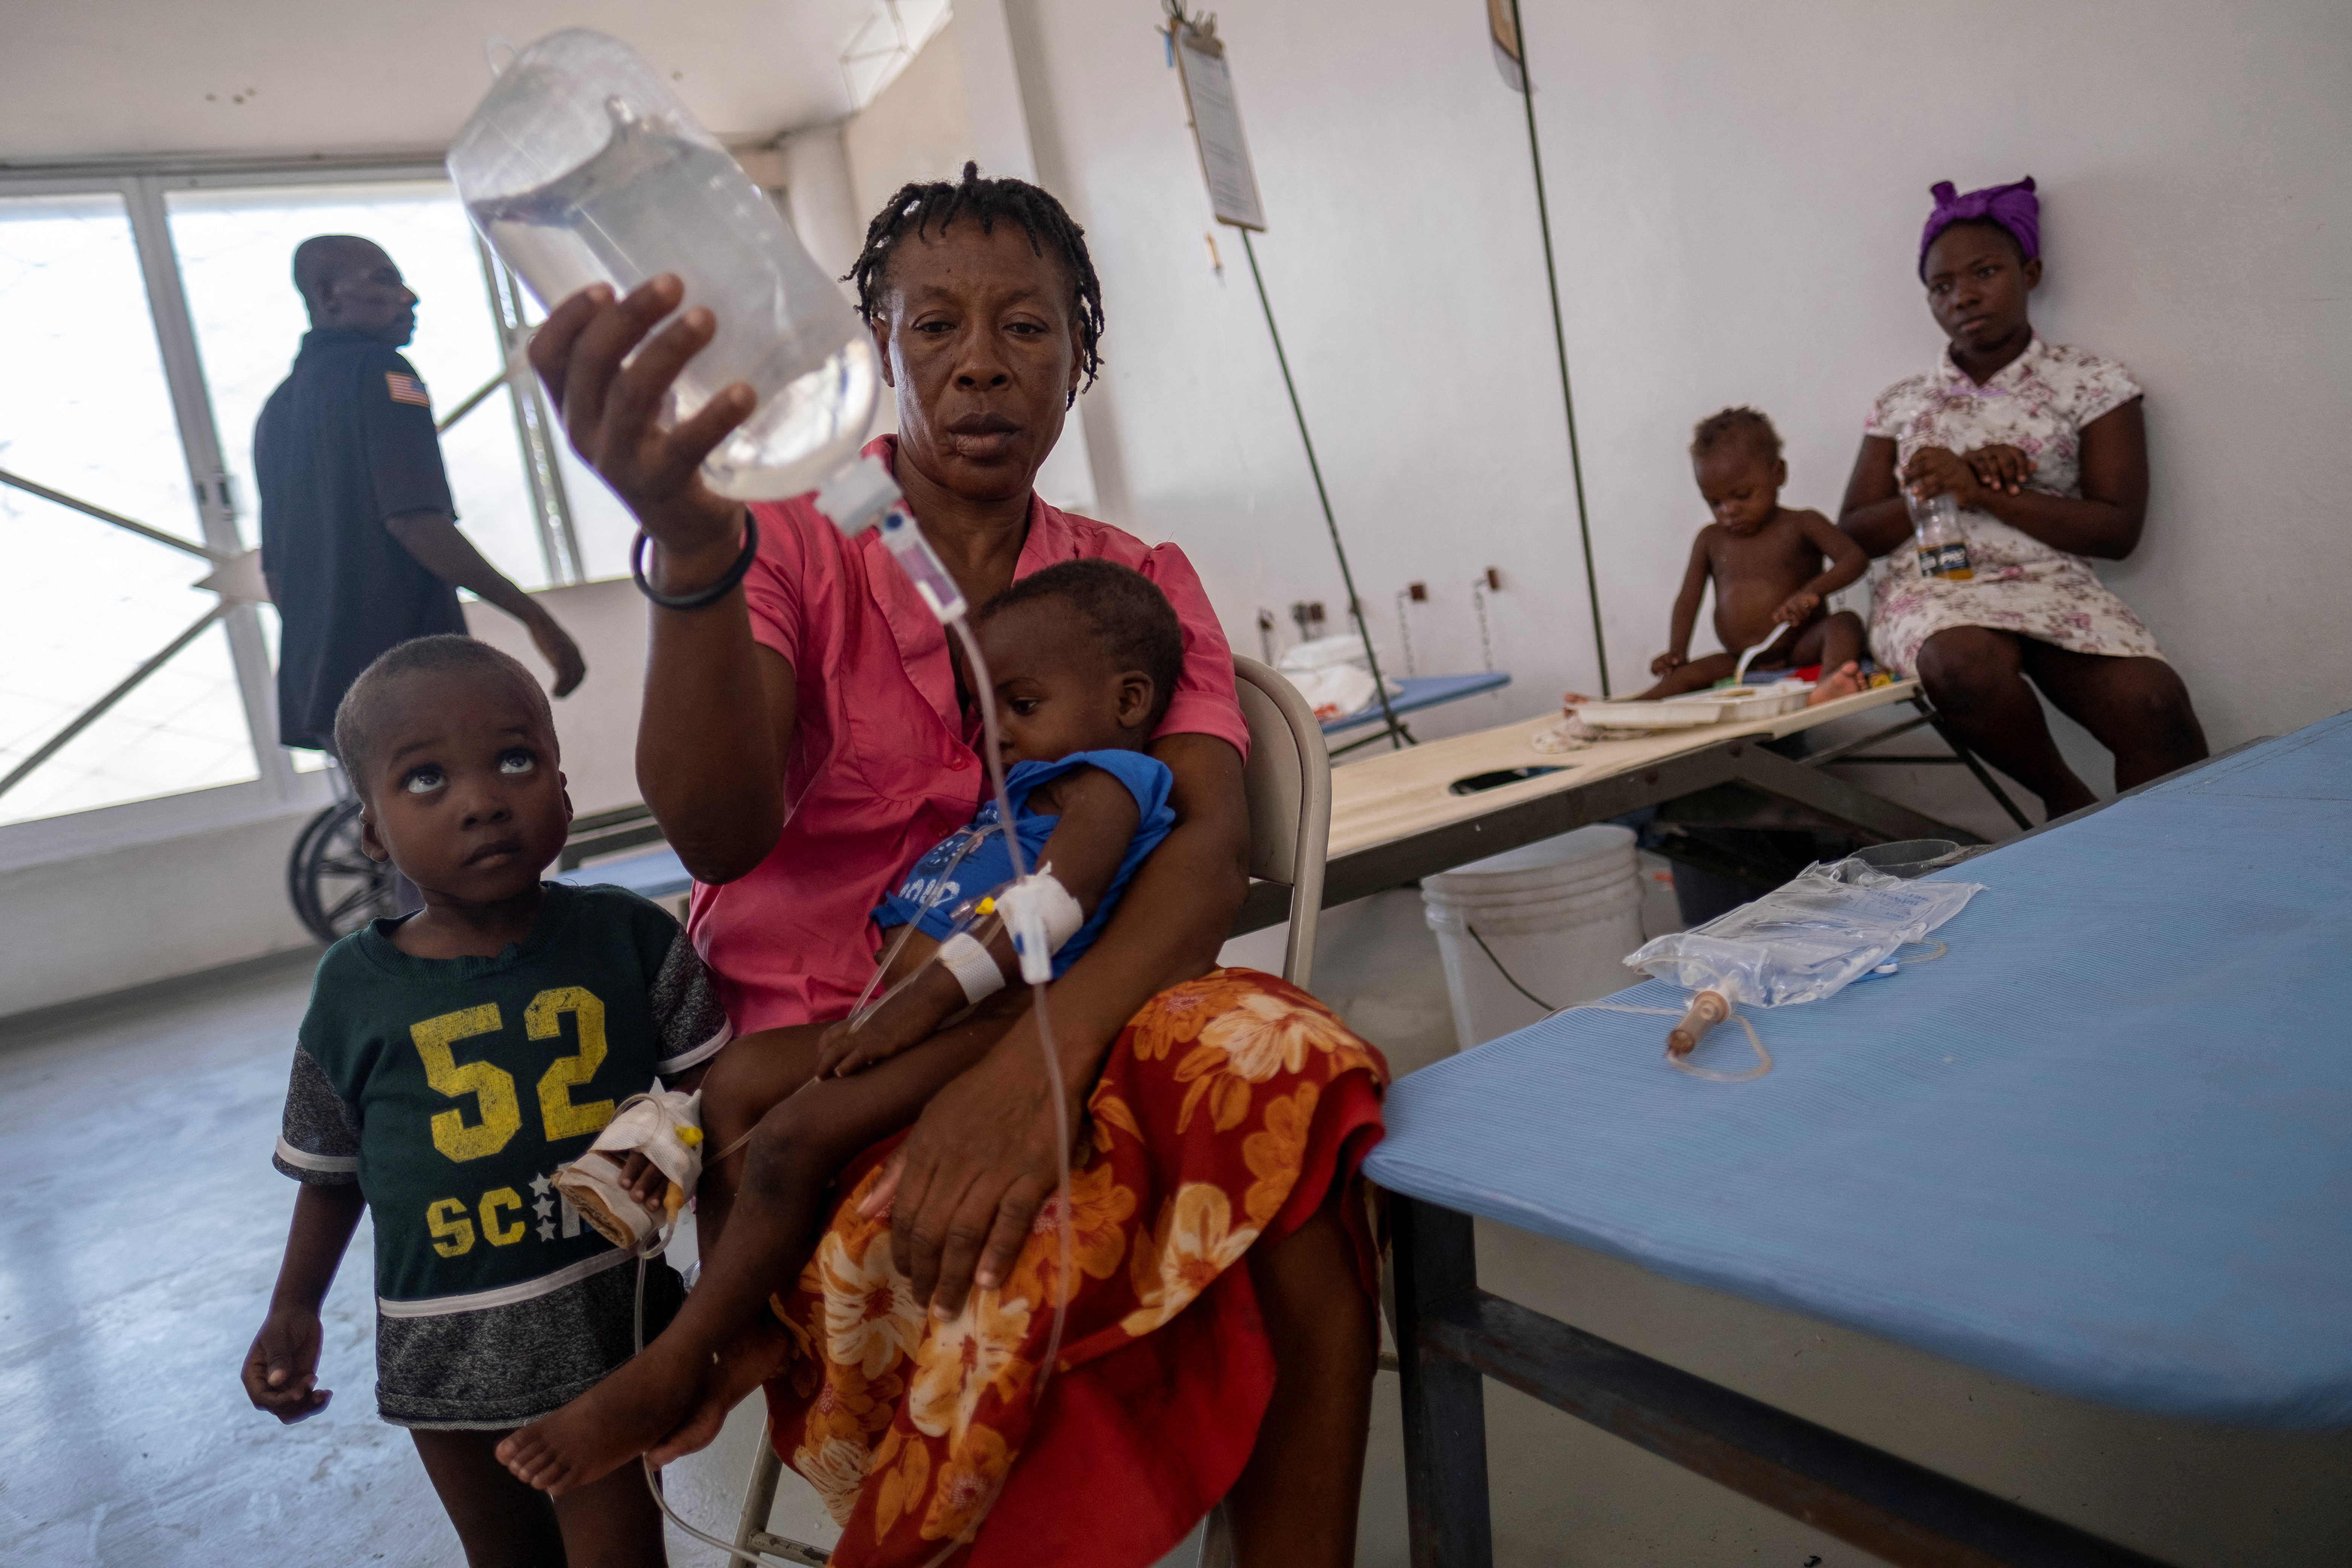 Etienne Lionesse holds a bag of intravenous solutions for her son as he receives treatment for cholera at the UNICEF-supported Gheskio Center hospital in Port-au-Prince, Haiti, on October 14, 2022.  REUTERS/Ricardo Arduengo/File